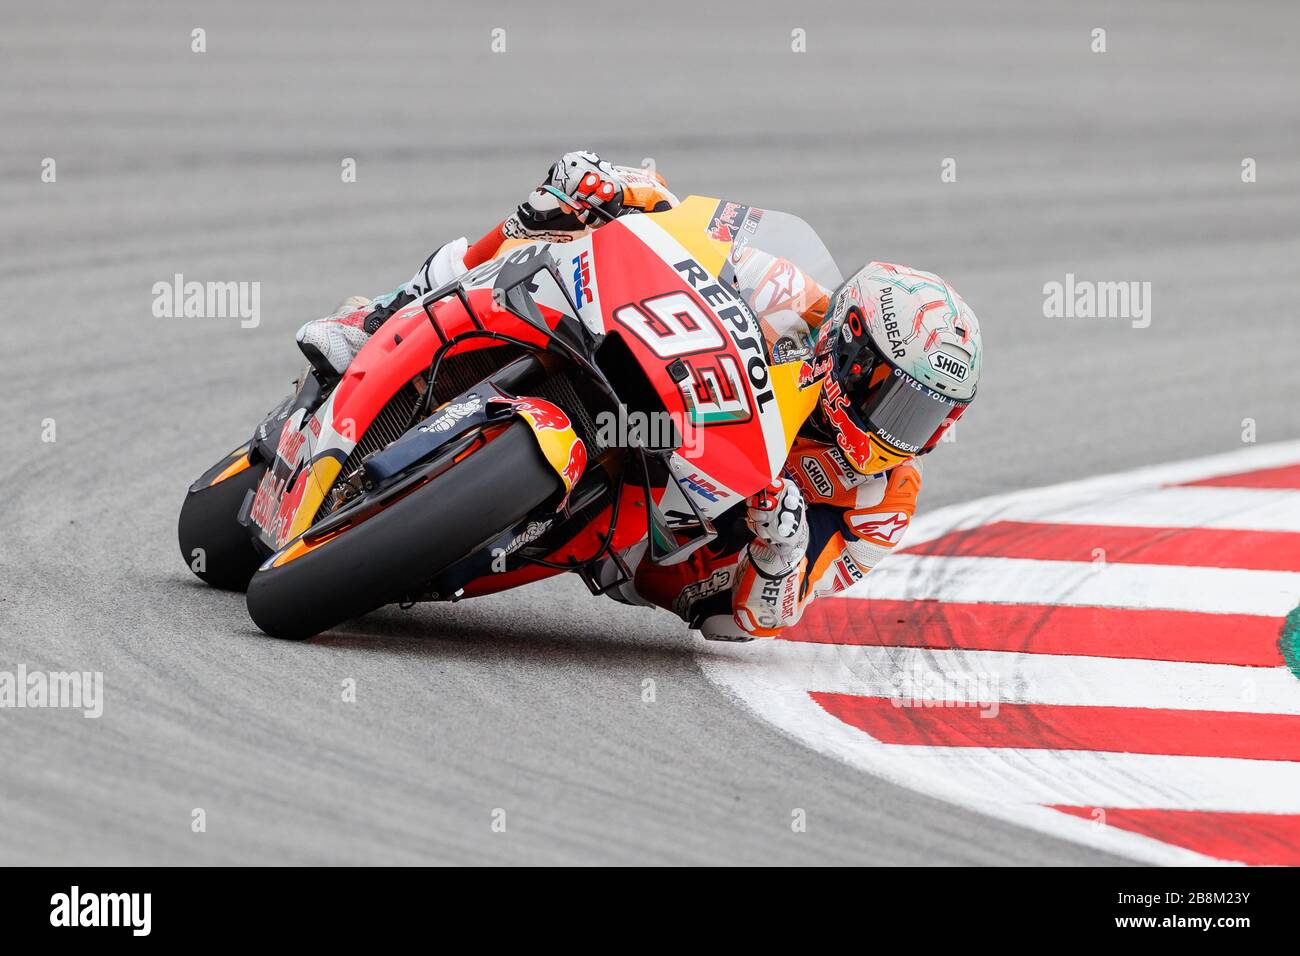 MONTMELO, SPAIN - JUNE 14: Marc Marquez of Repsol Honda Team during the  Free practice motoGP at Circuit de Catalunya on June 14, 2019 in Montmelo,  Spa Stock Photo - Alamy